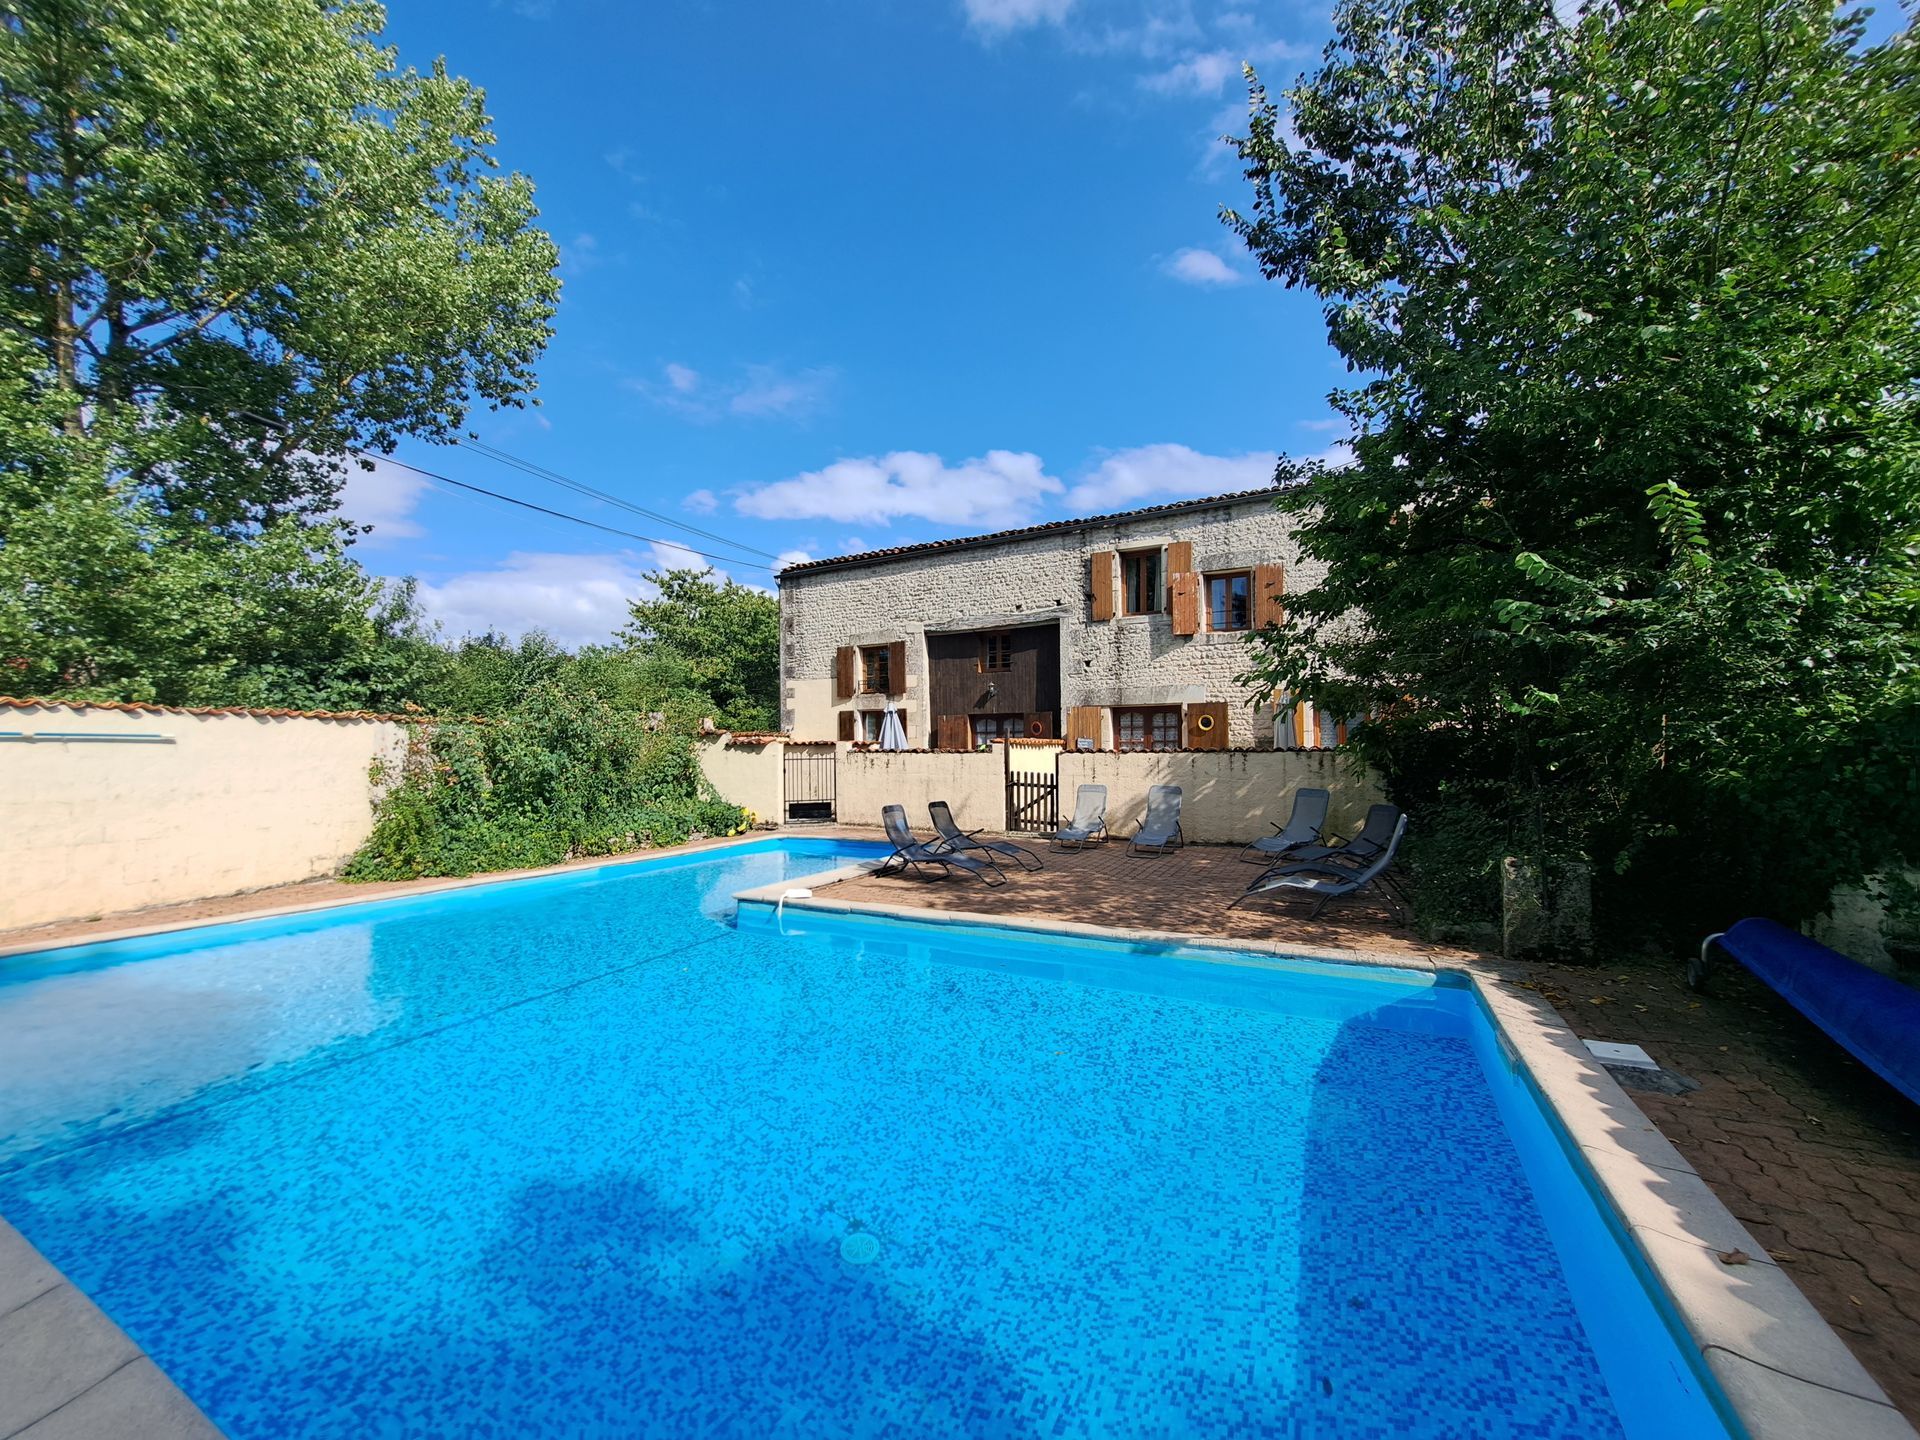 L shaped swimming pool with stone cottage